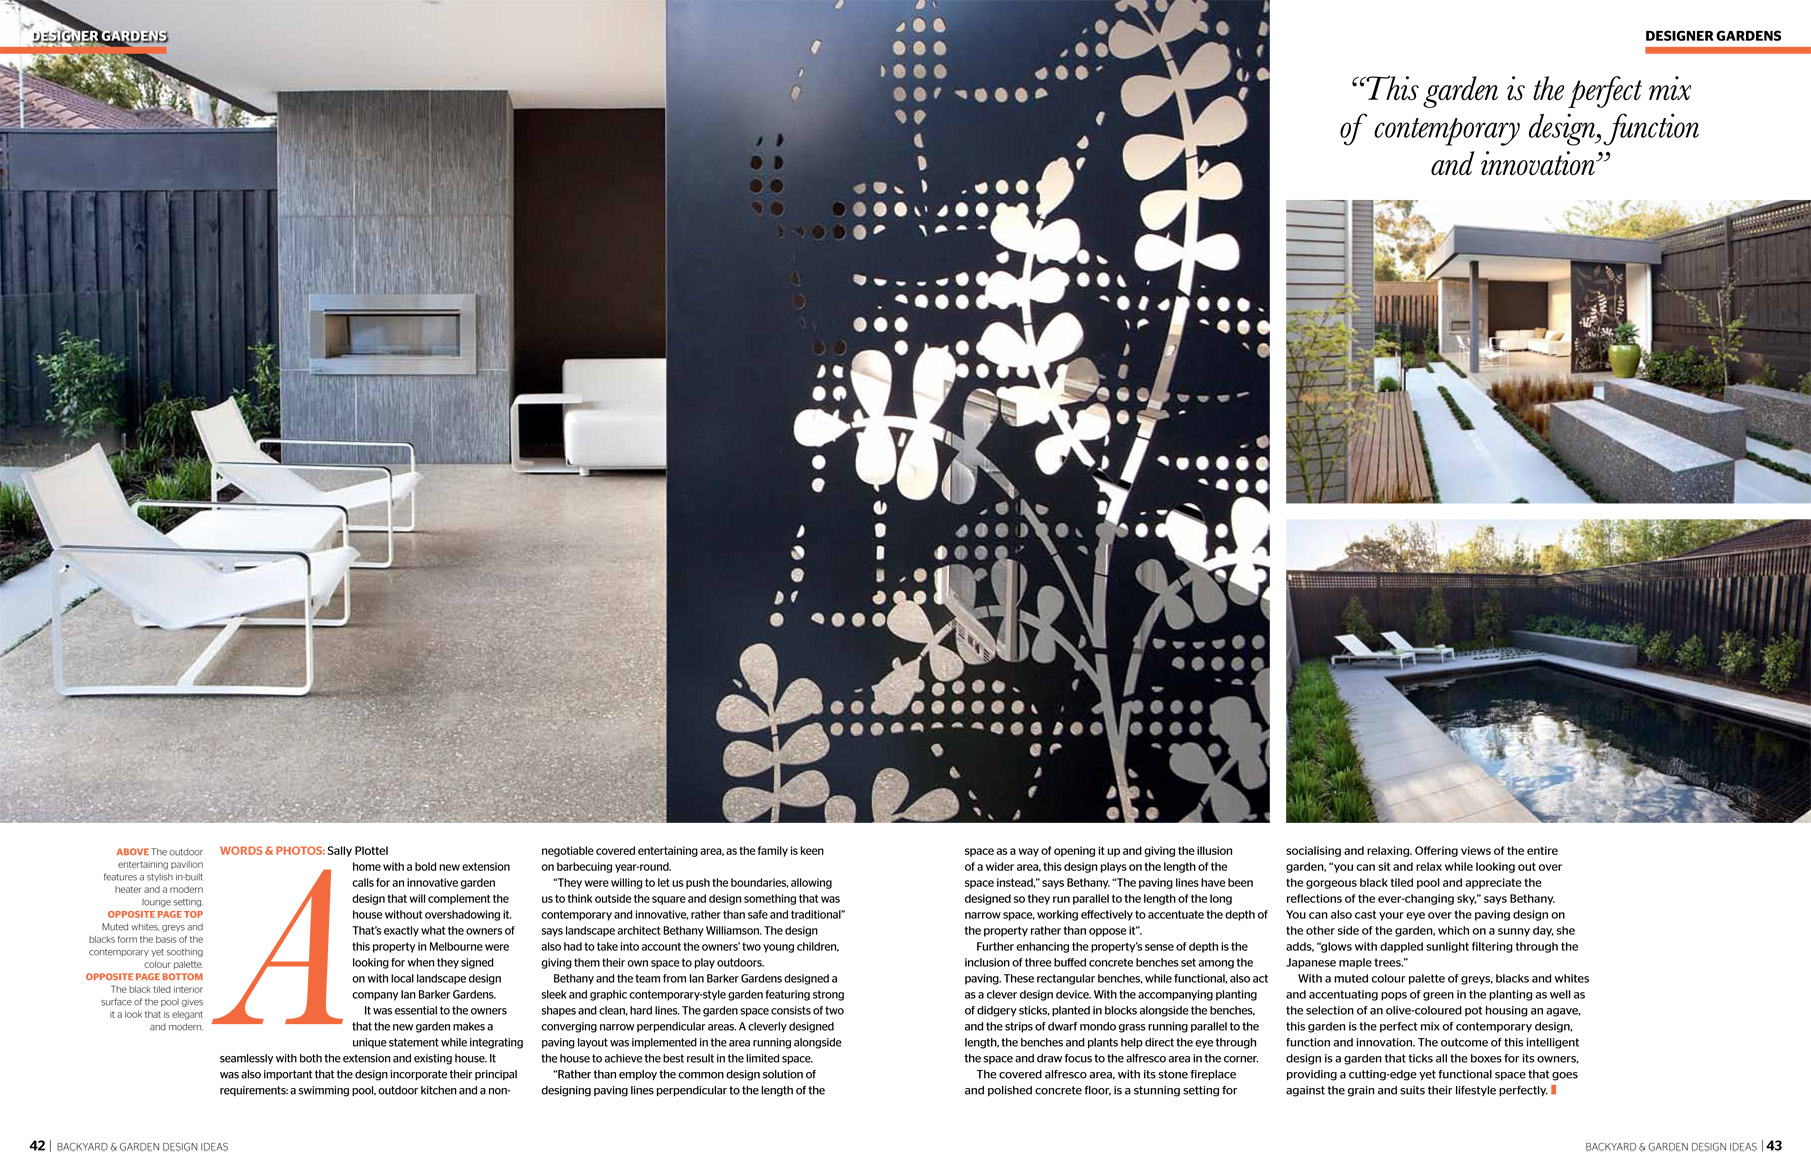 Ian Barker Gardens feature in Backyard and Garden Design Ideas Issue 11.5 article 'Straight and Narrow''.